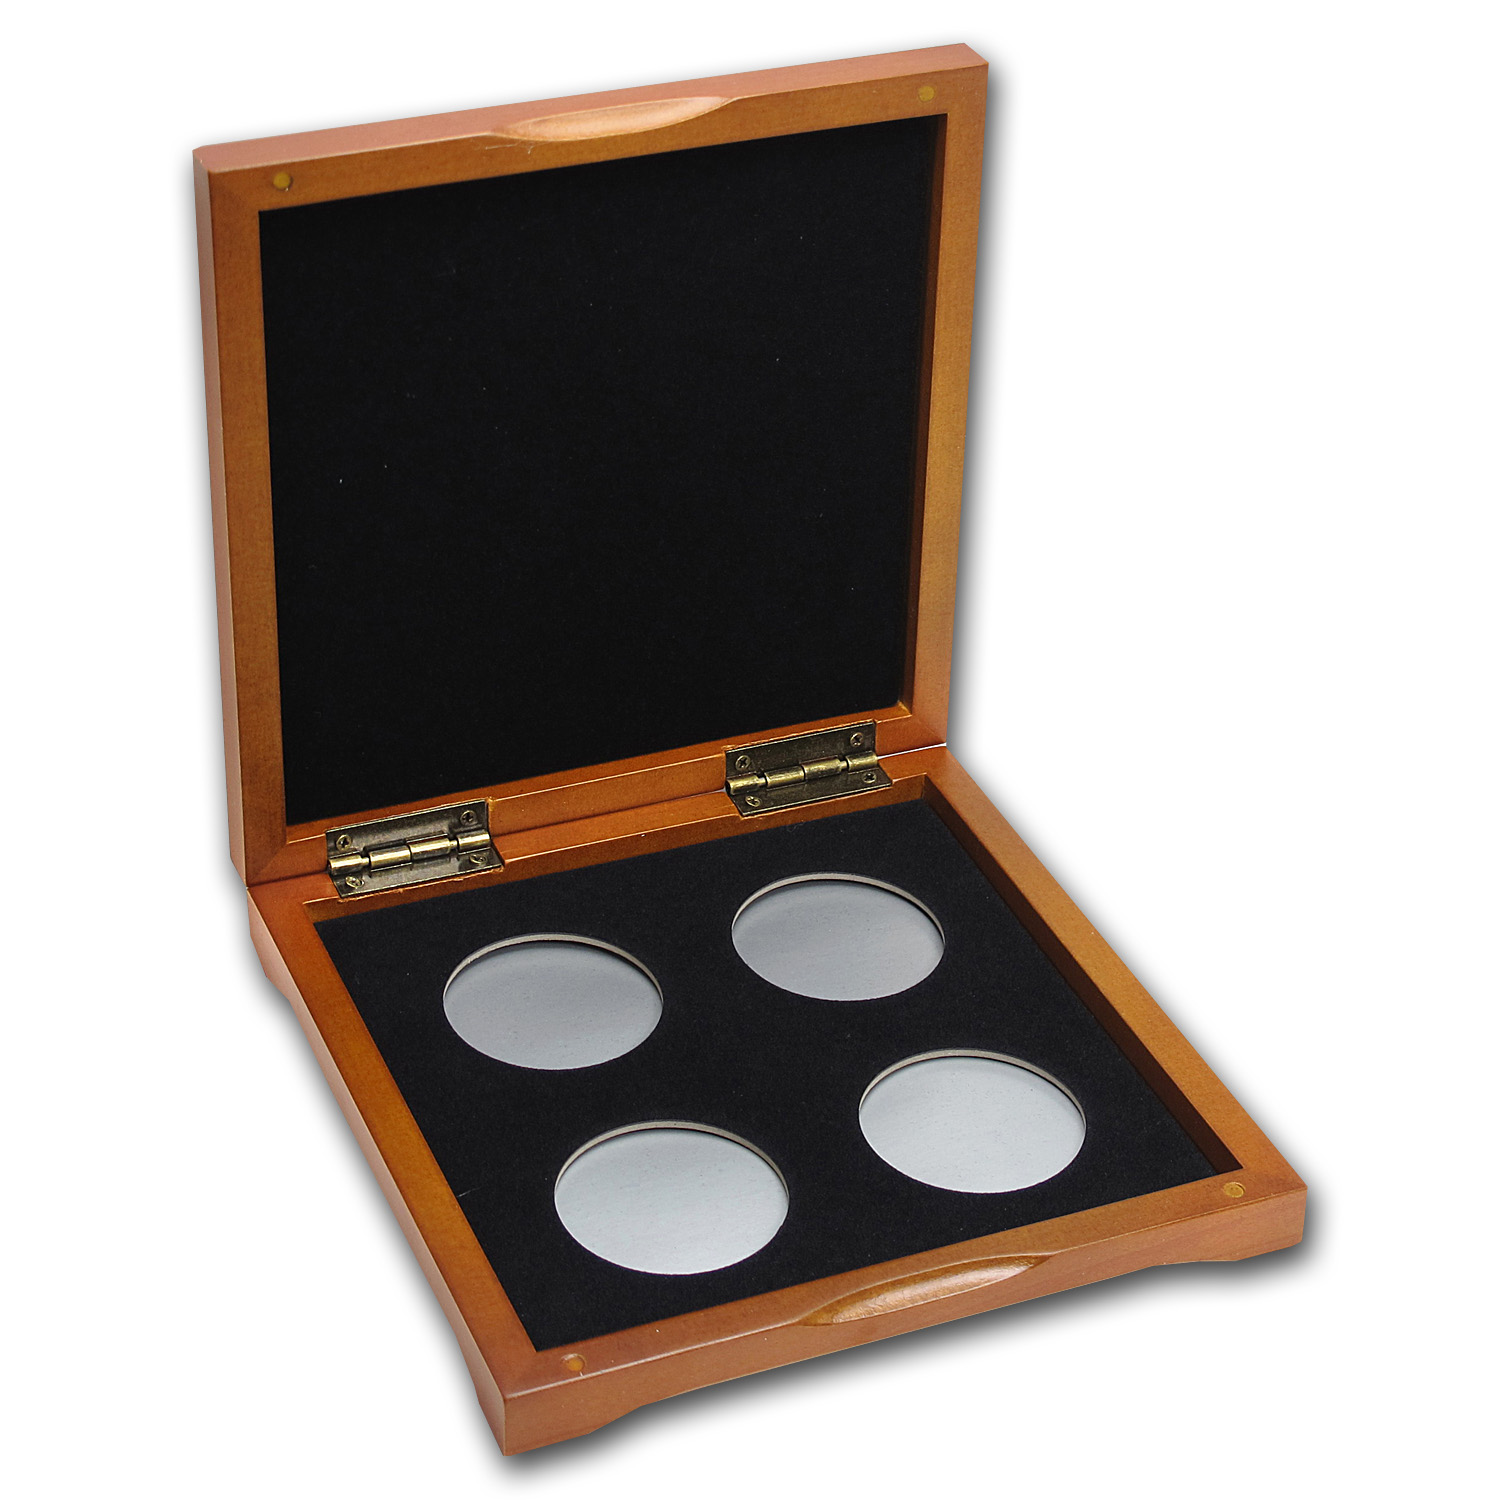 Buy 4 coin Wood Presentation Box - Fits Up to 40 mm